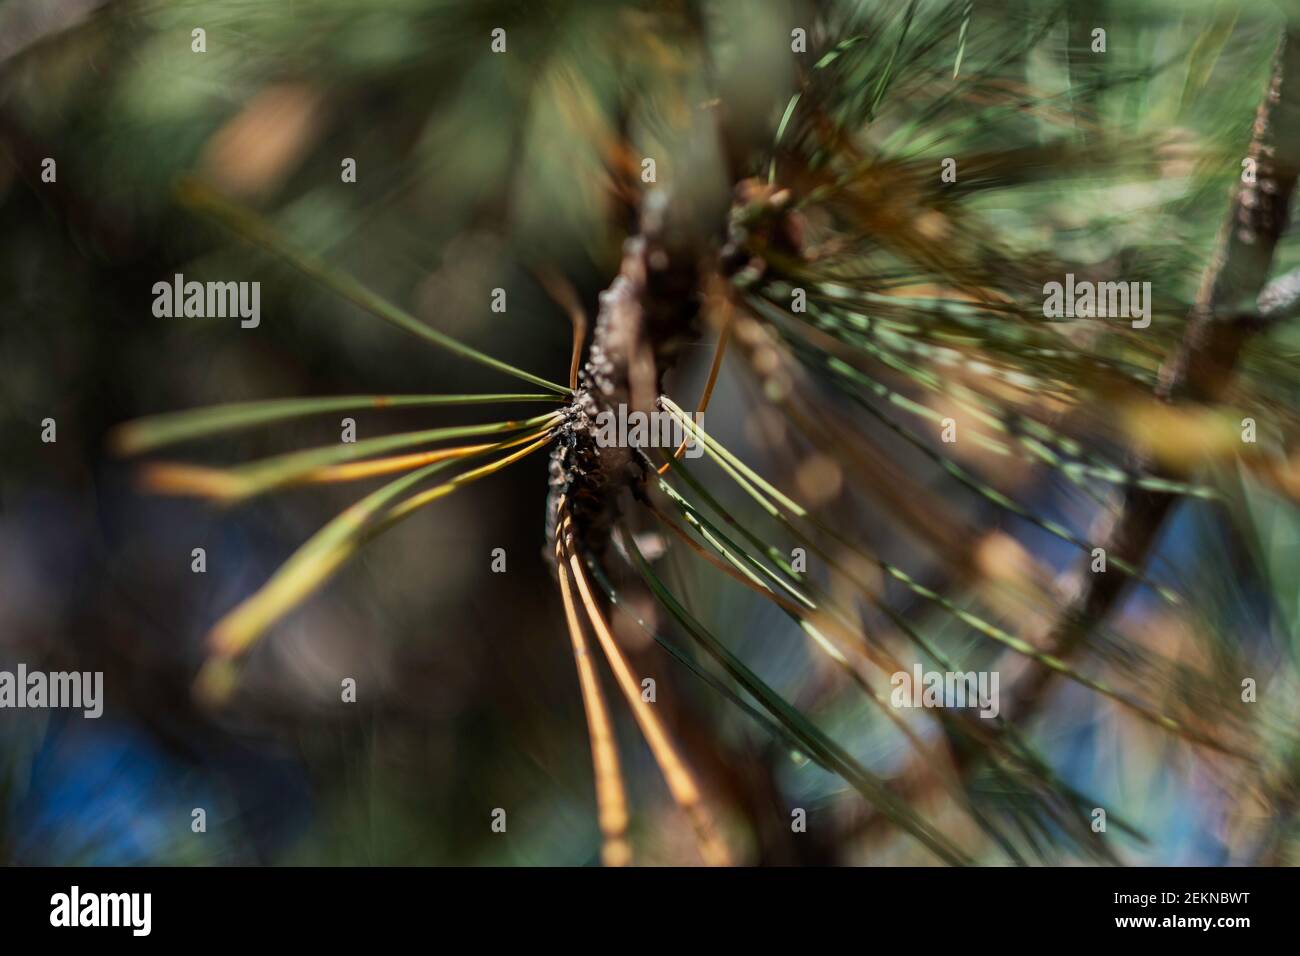 Closeup off the fascicles of an Austrian pine tree showing two-needle clusters, important for identification. USA. Stock Photo